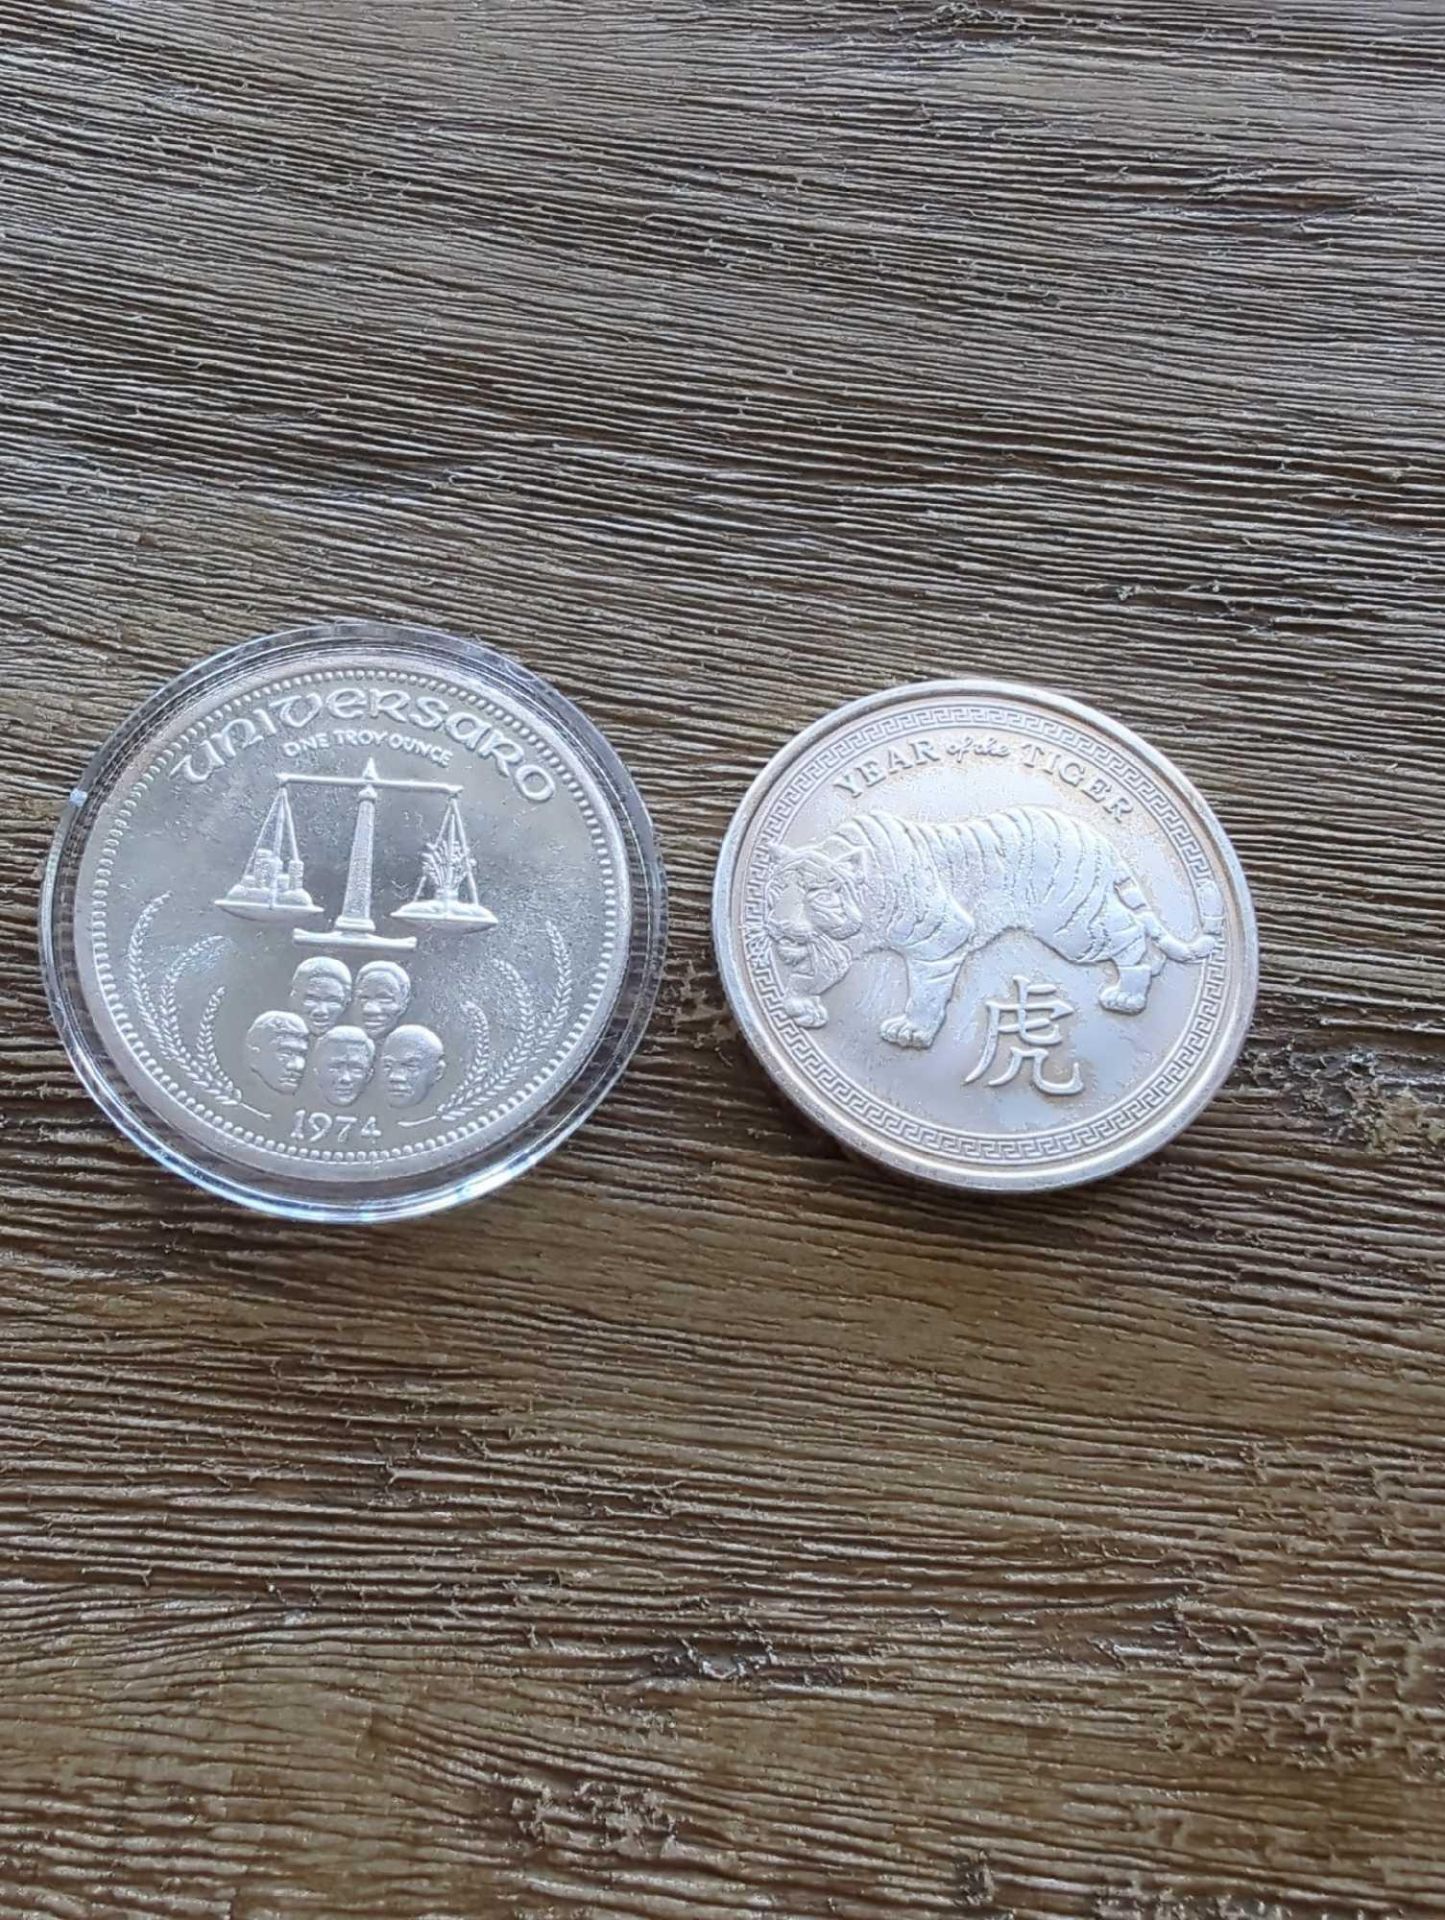 2 misc silver coins